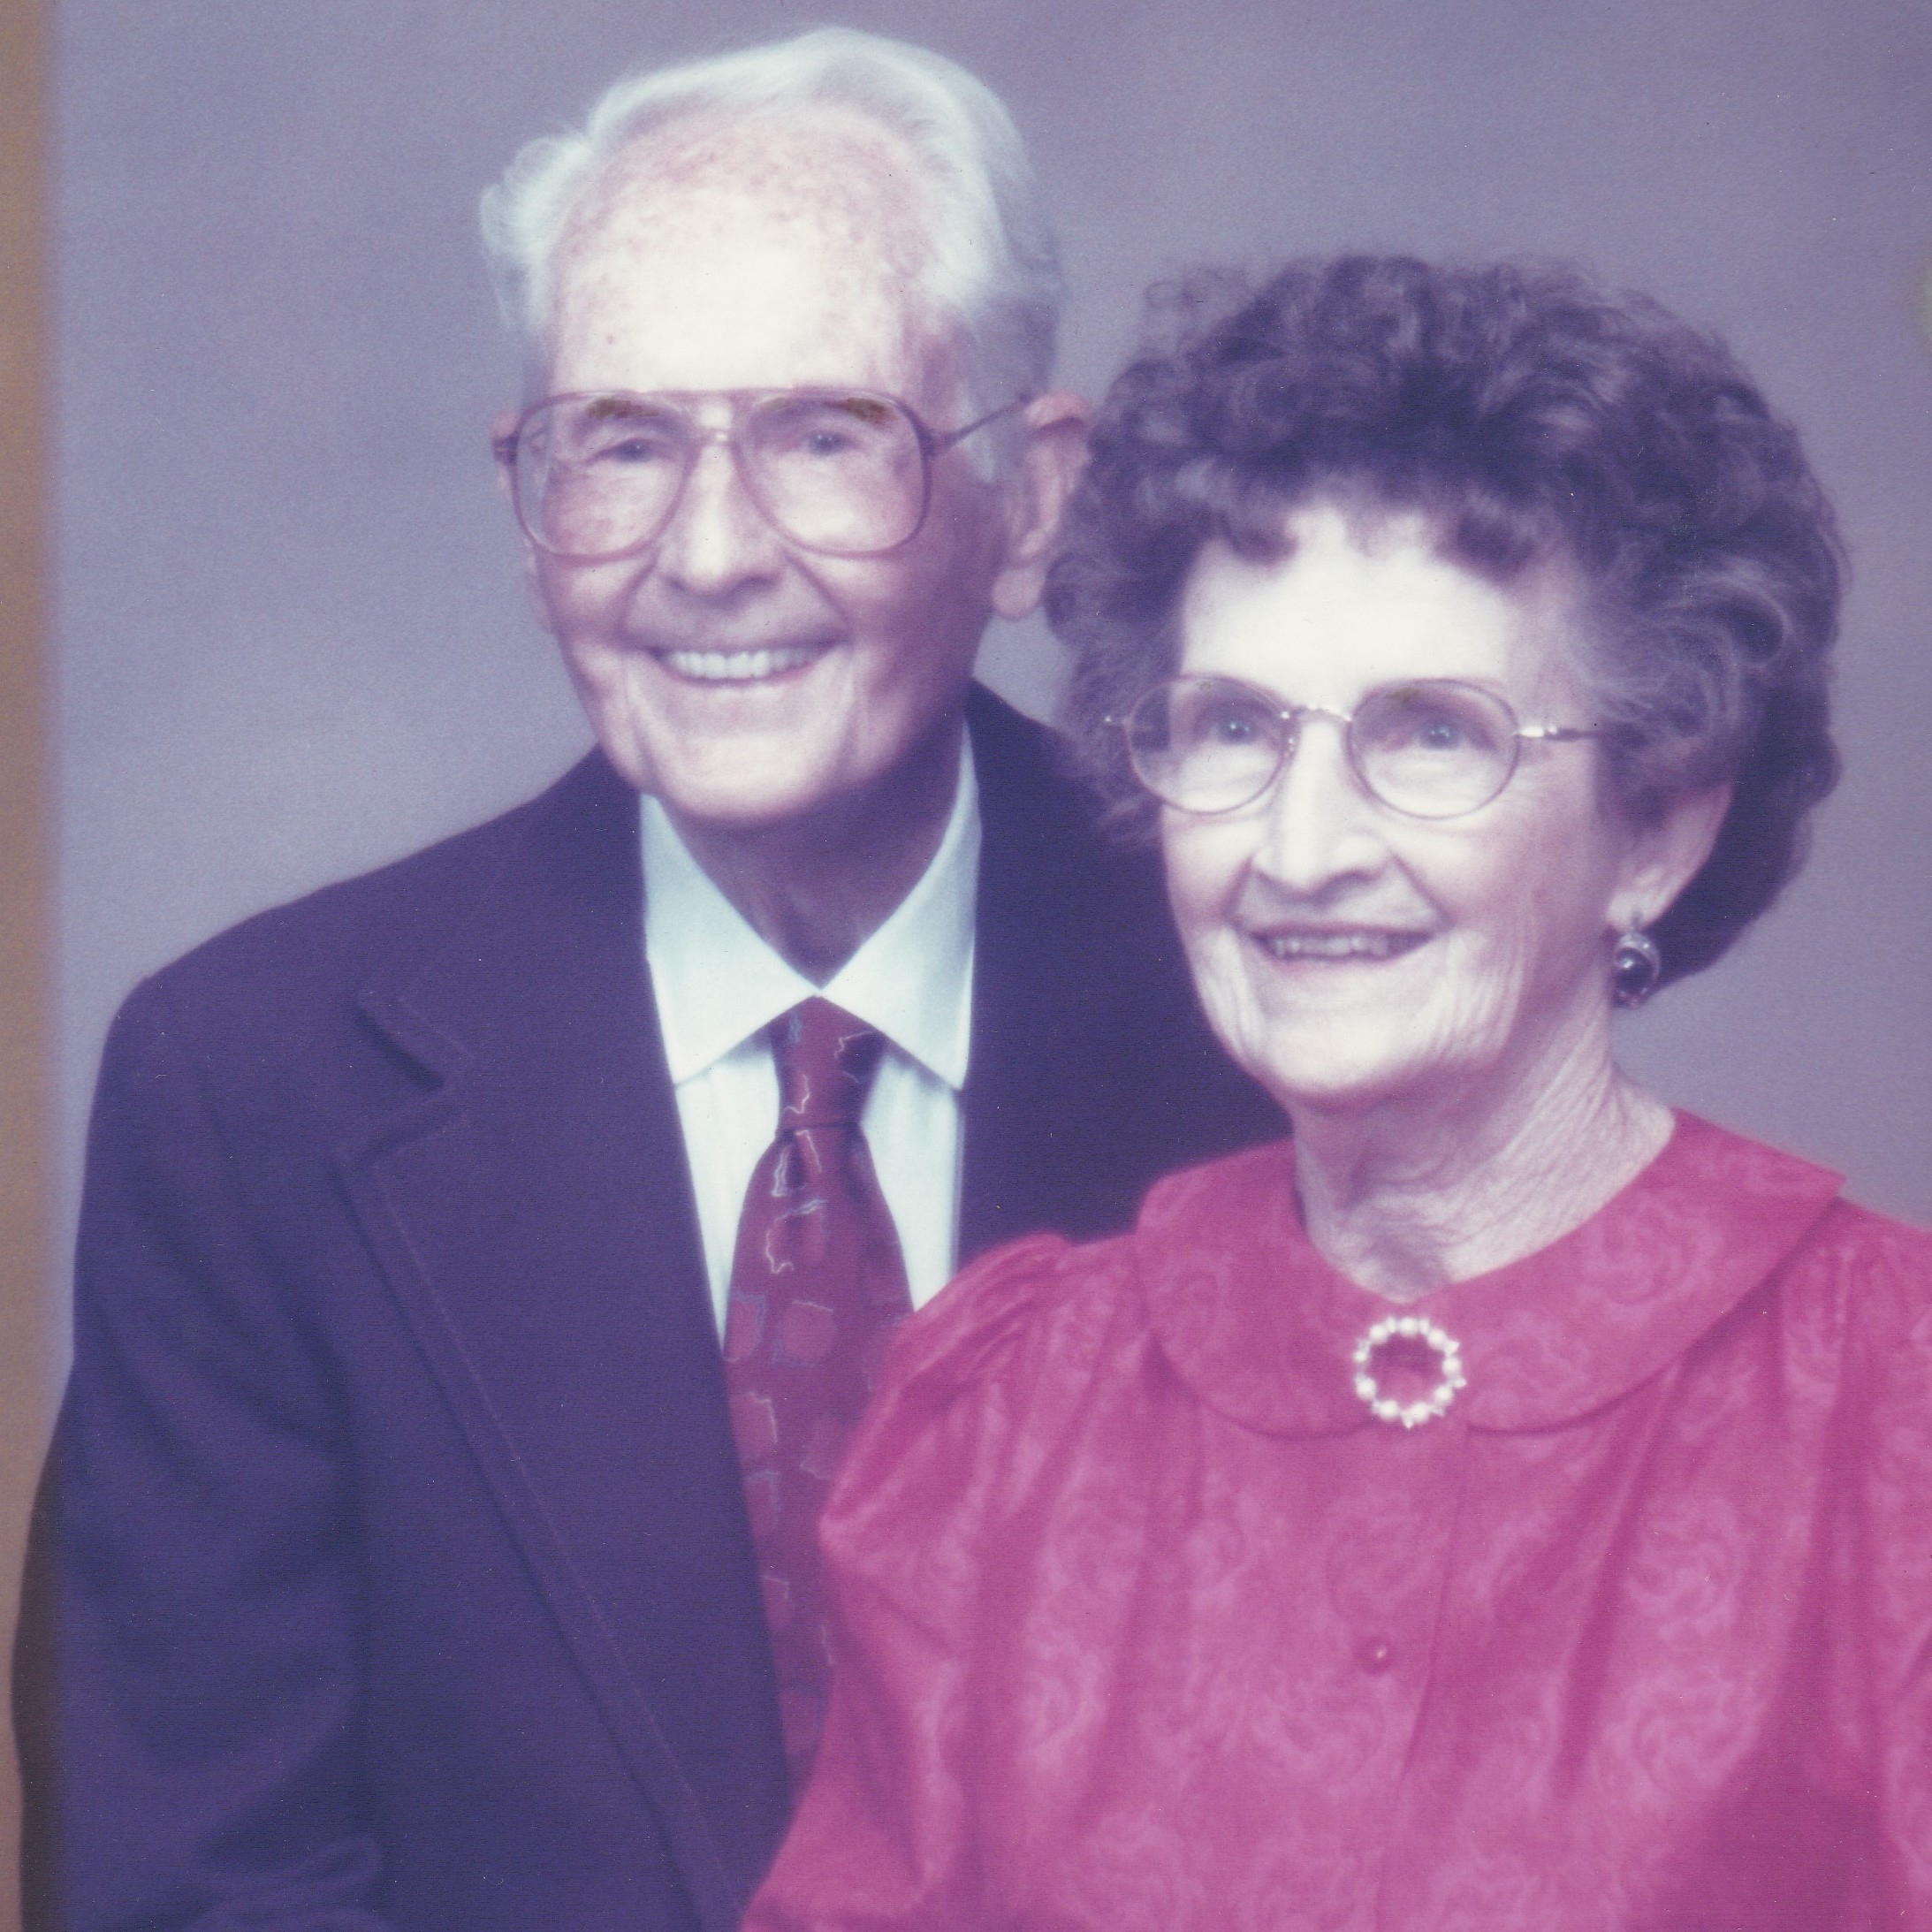 Couple’s $500,000 Gift to Benefit Students